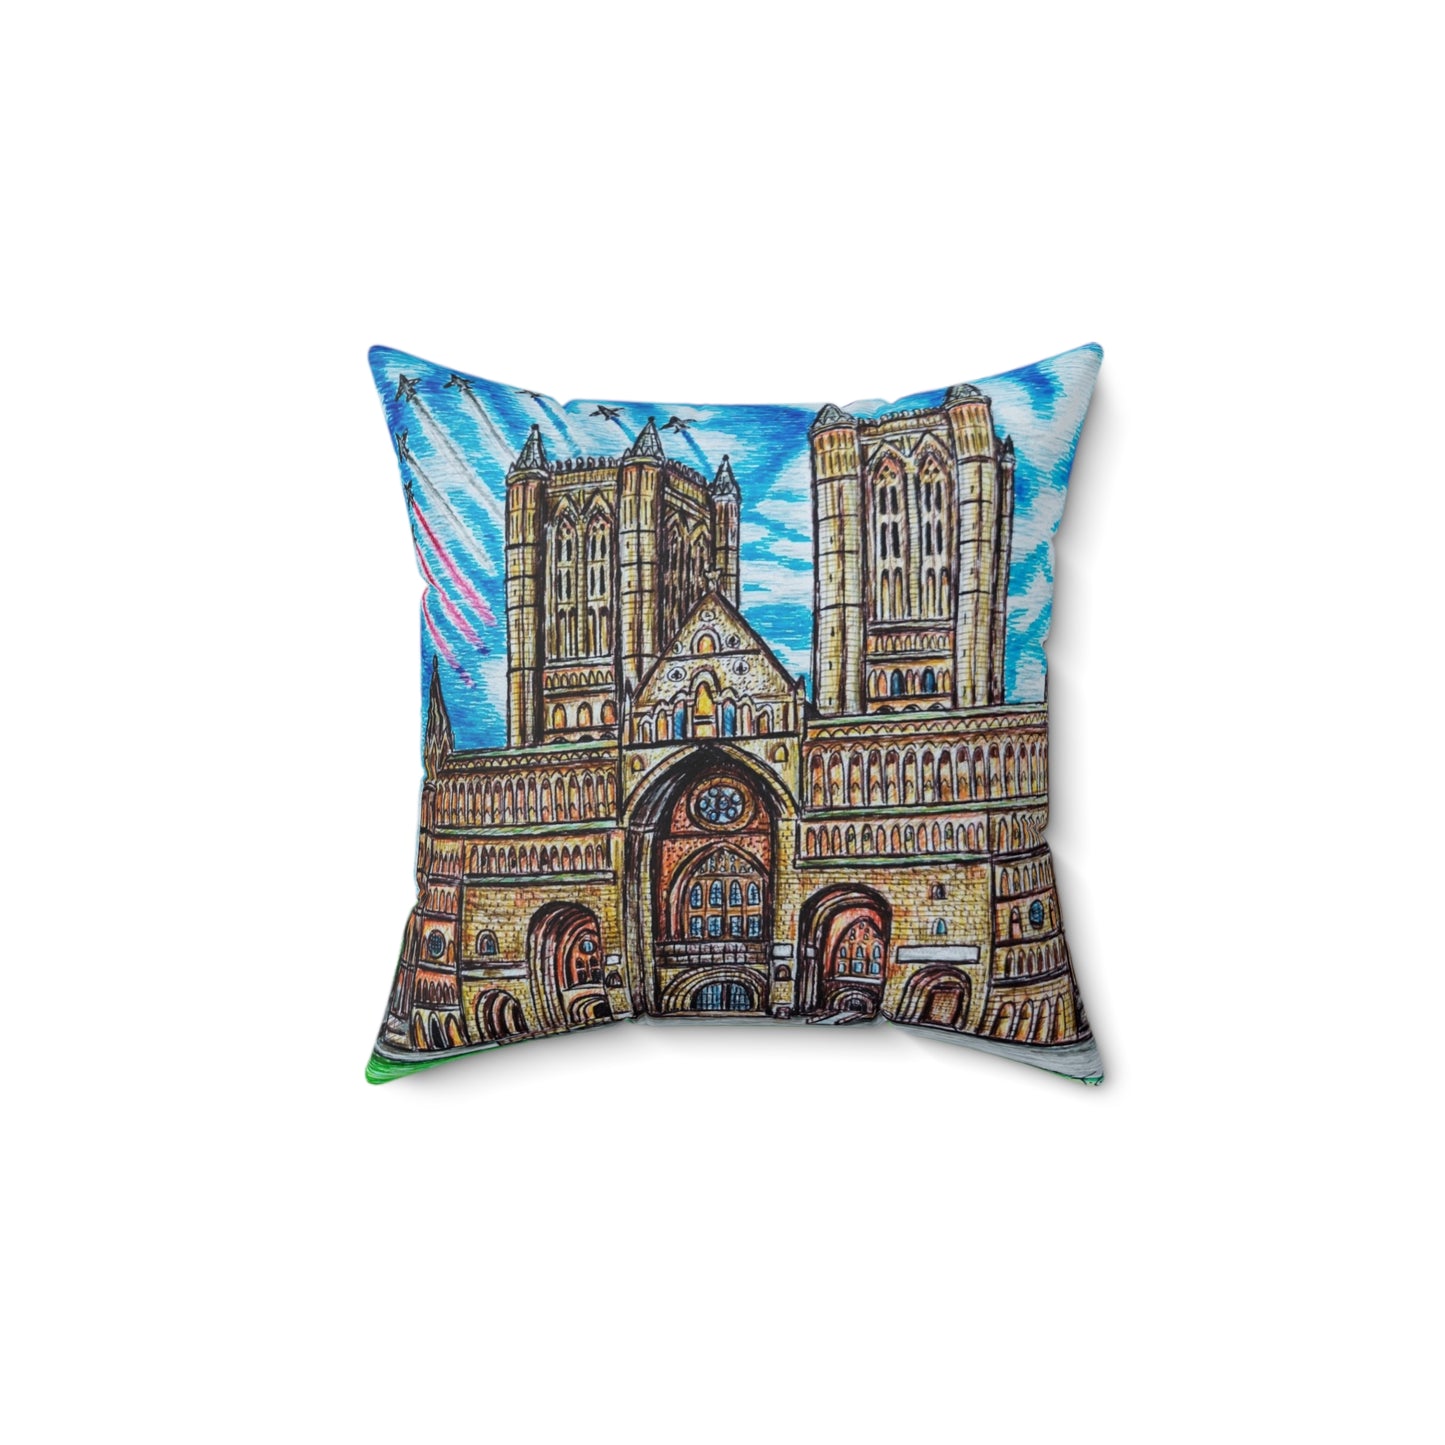 Indoor decorative cushion- Lincoln Cathedral